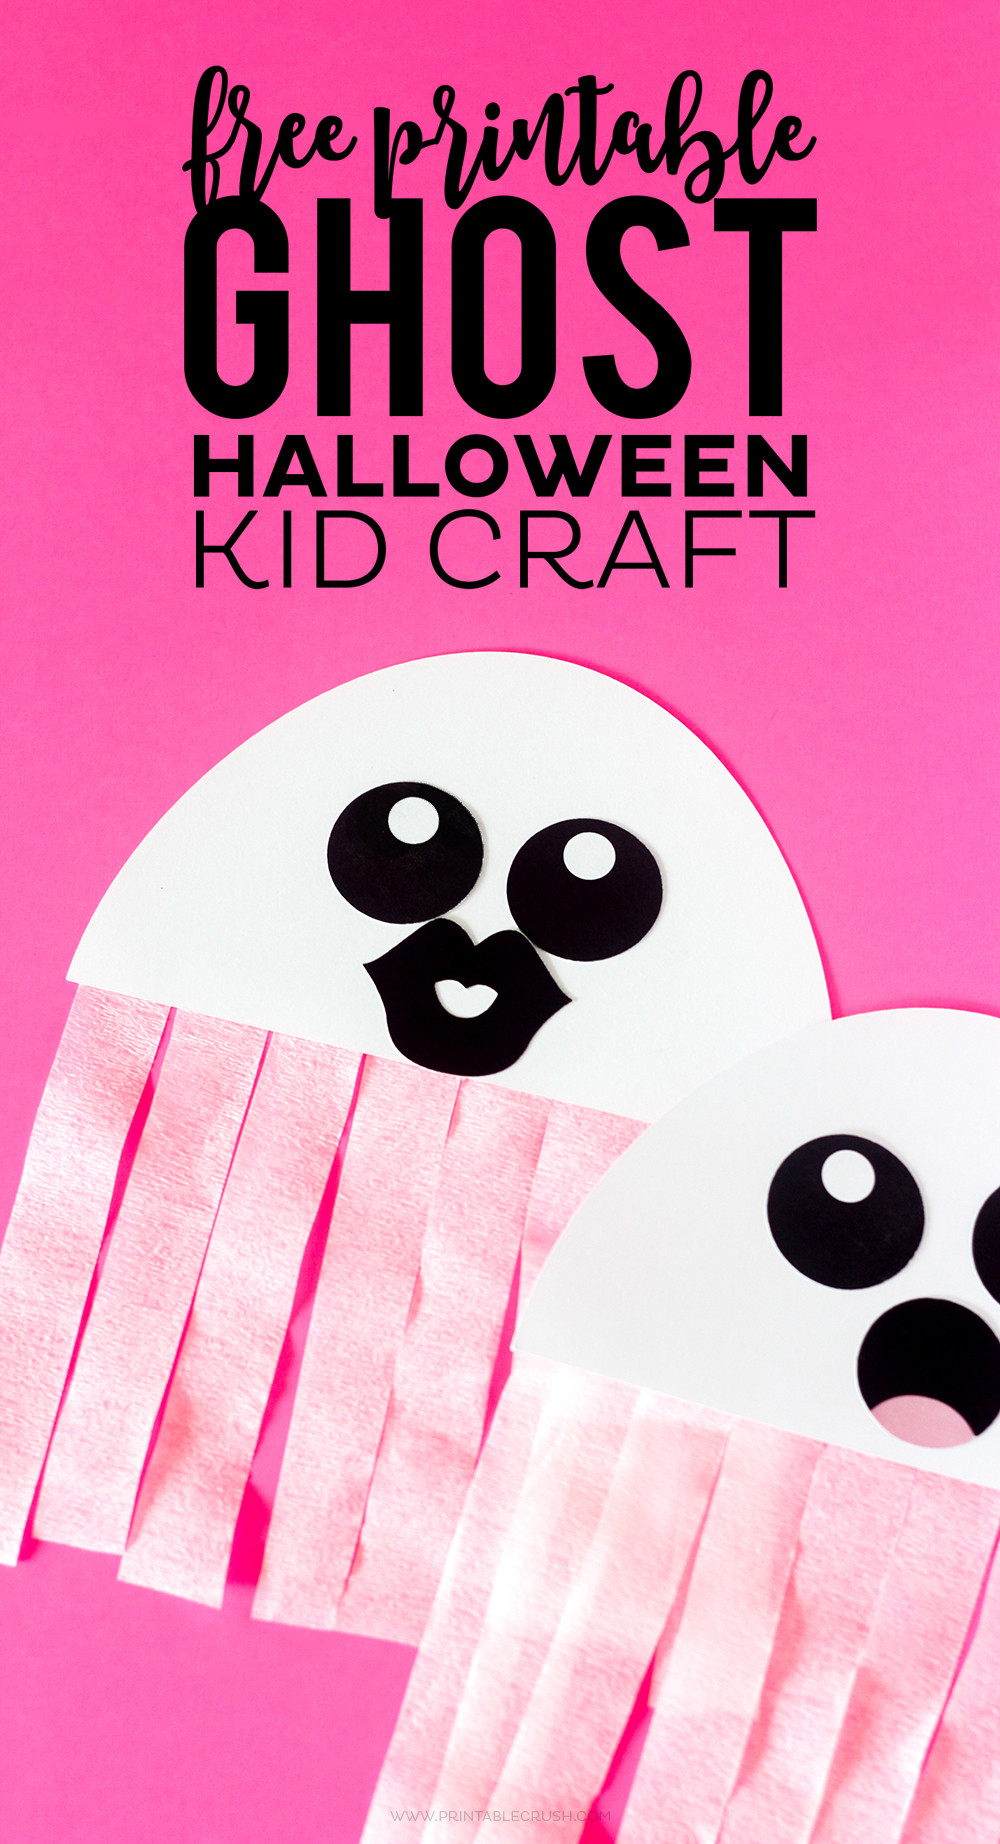 Printable Craft For Kids
 Halloween Kid Crafts The Crafting Chicks